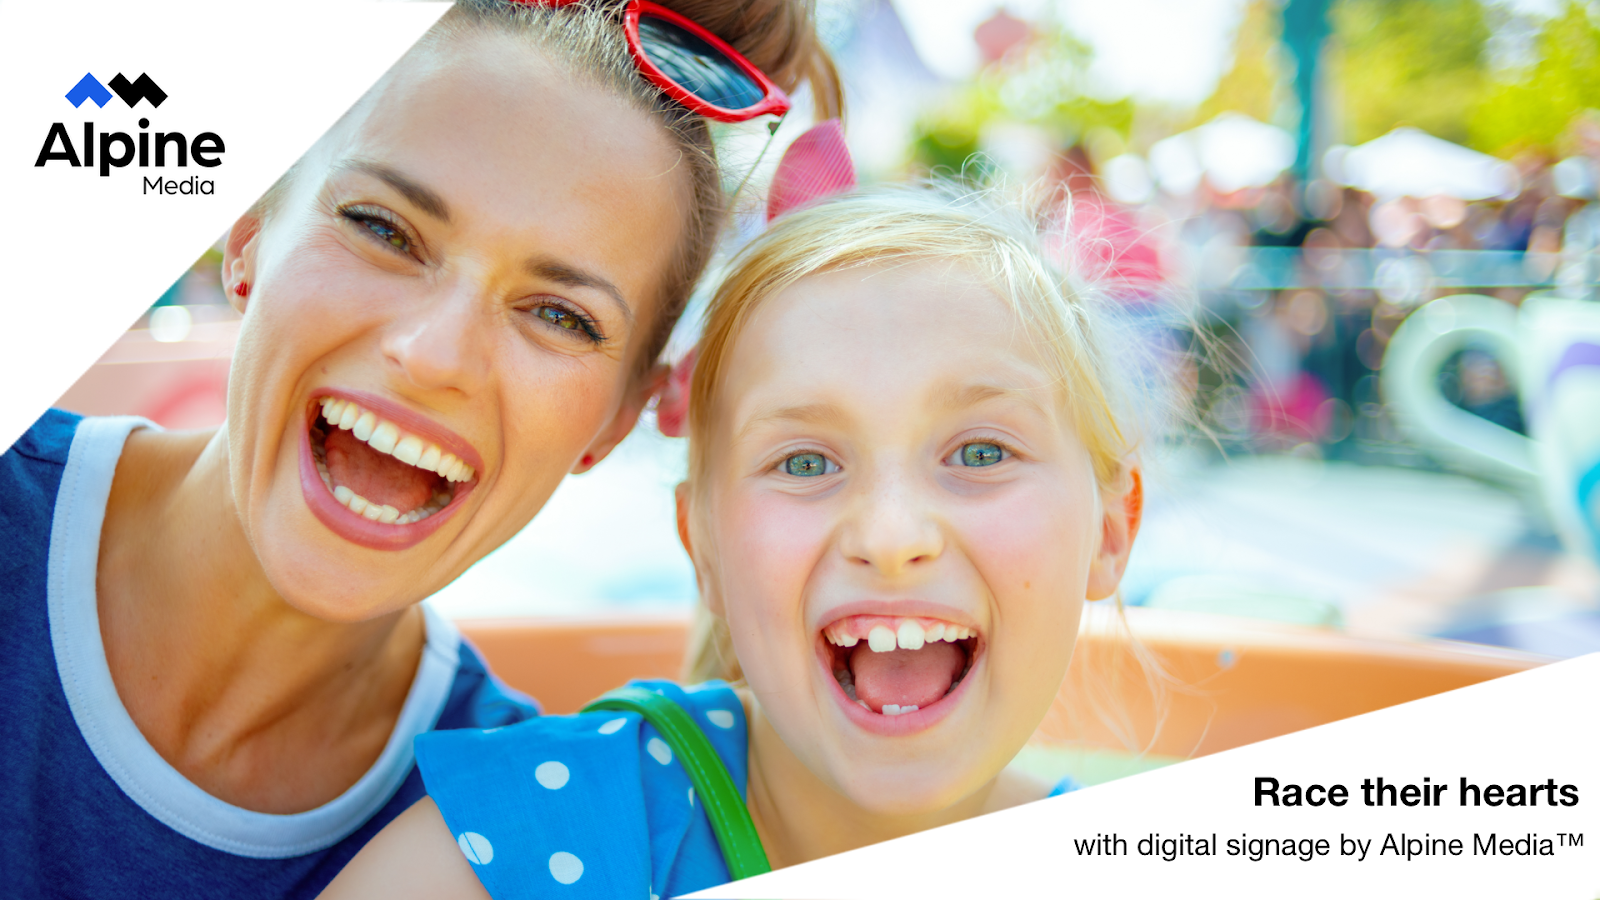 Outdoor Digital Signage Displays race your guests' hearts - Fun with mom